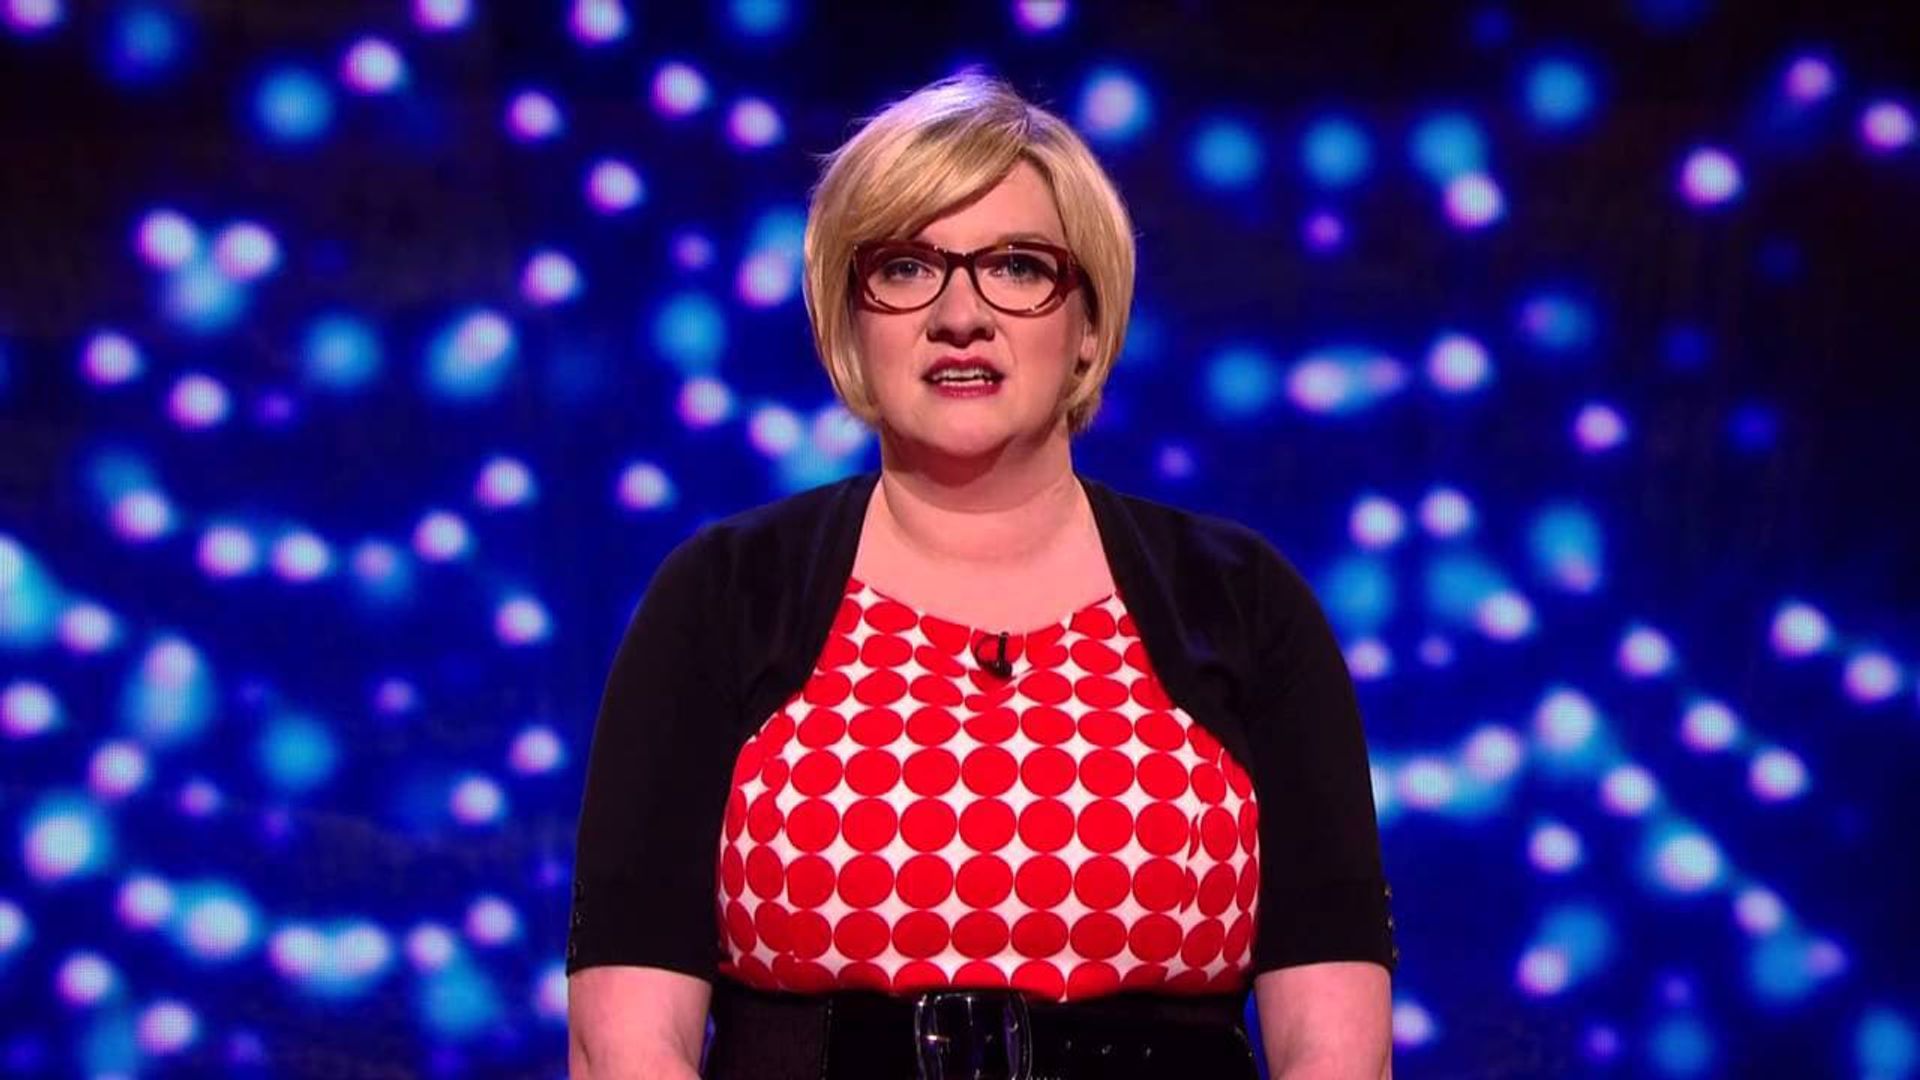 The Sarah Millican Television Programme background